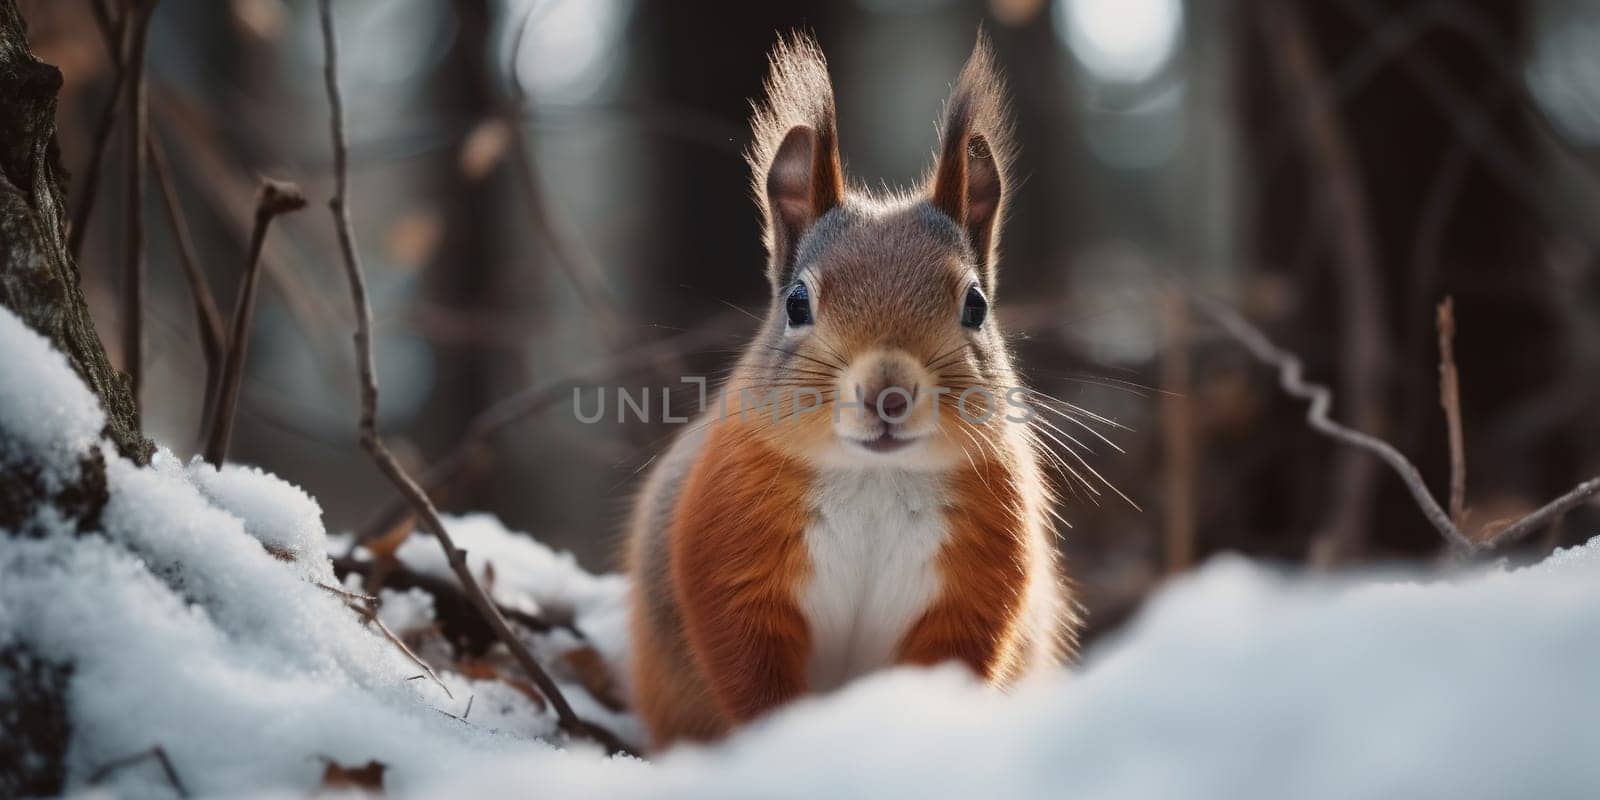 Cute Red Wild Squirrel In Winter Forest, Animal In Natural Habitat